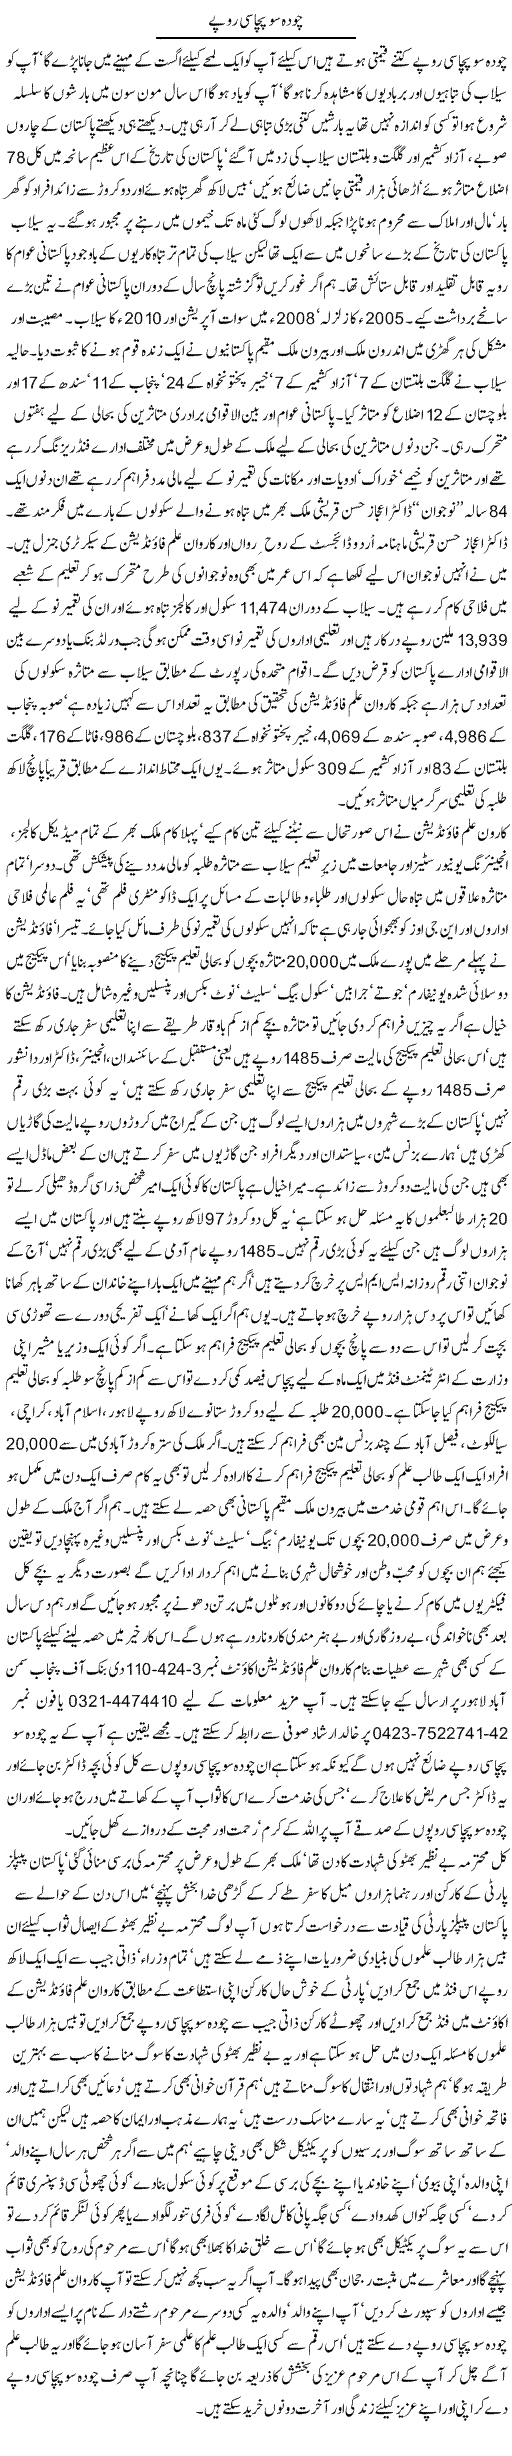 1485 RS Express Column Javed Chaudhry 28 December 2010